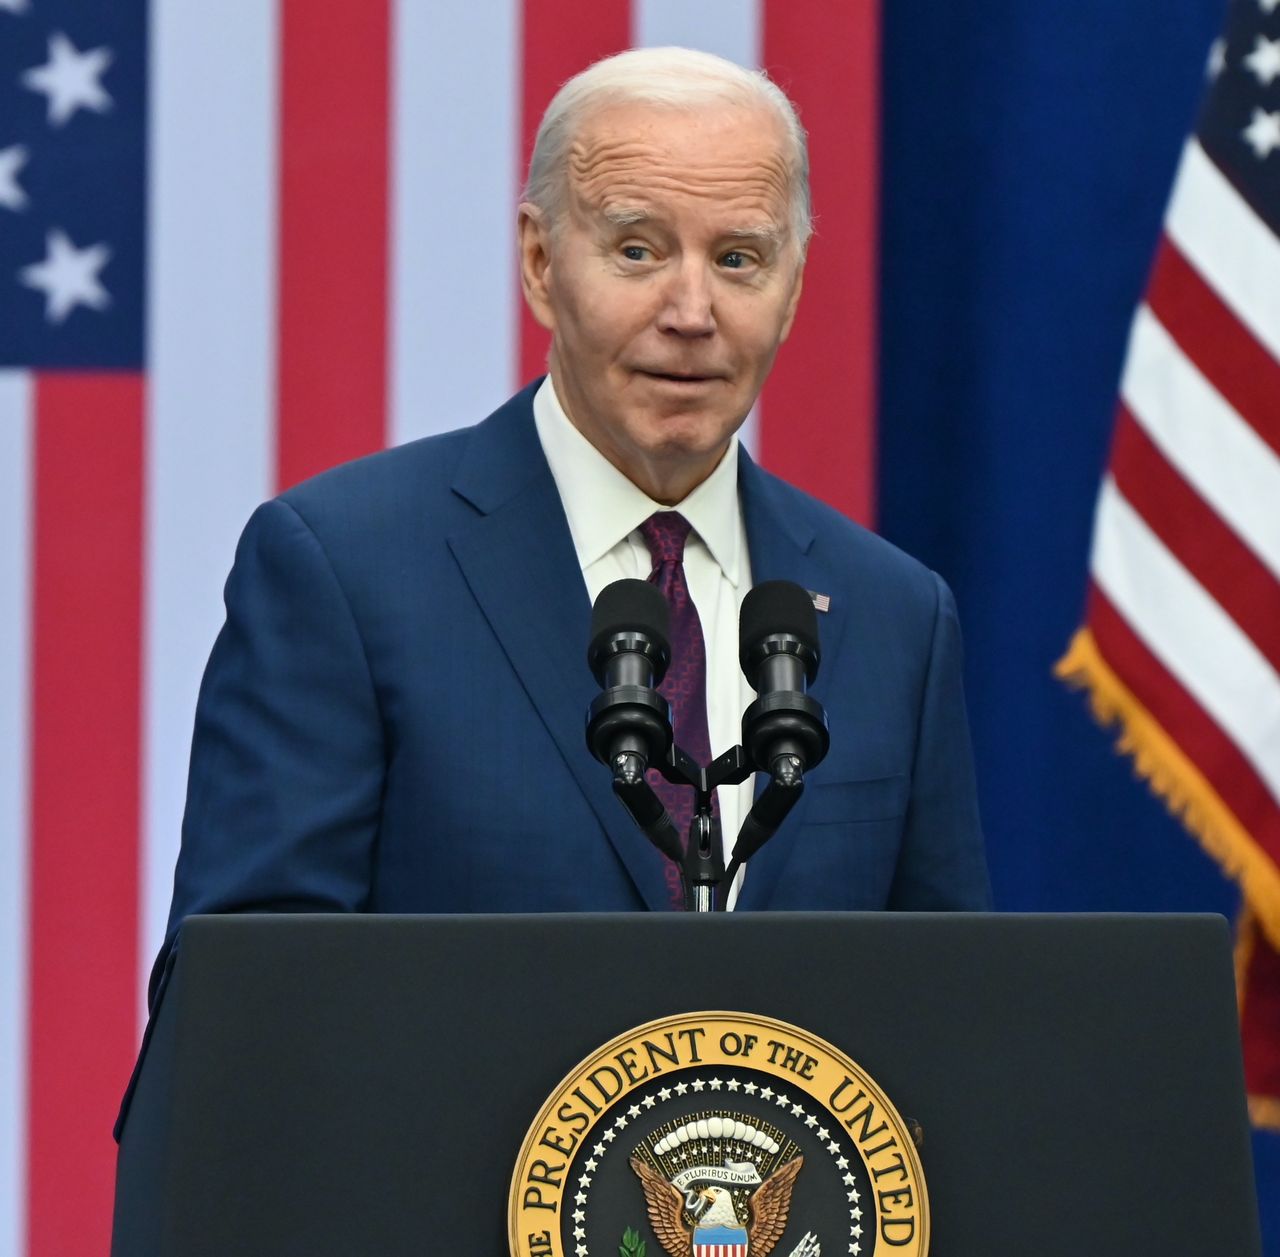 Biden surges ahead in campaign funding